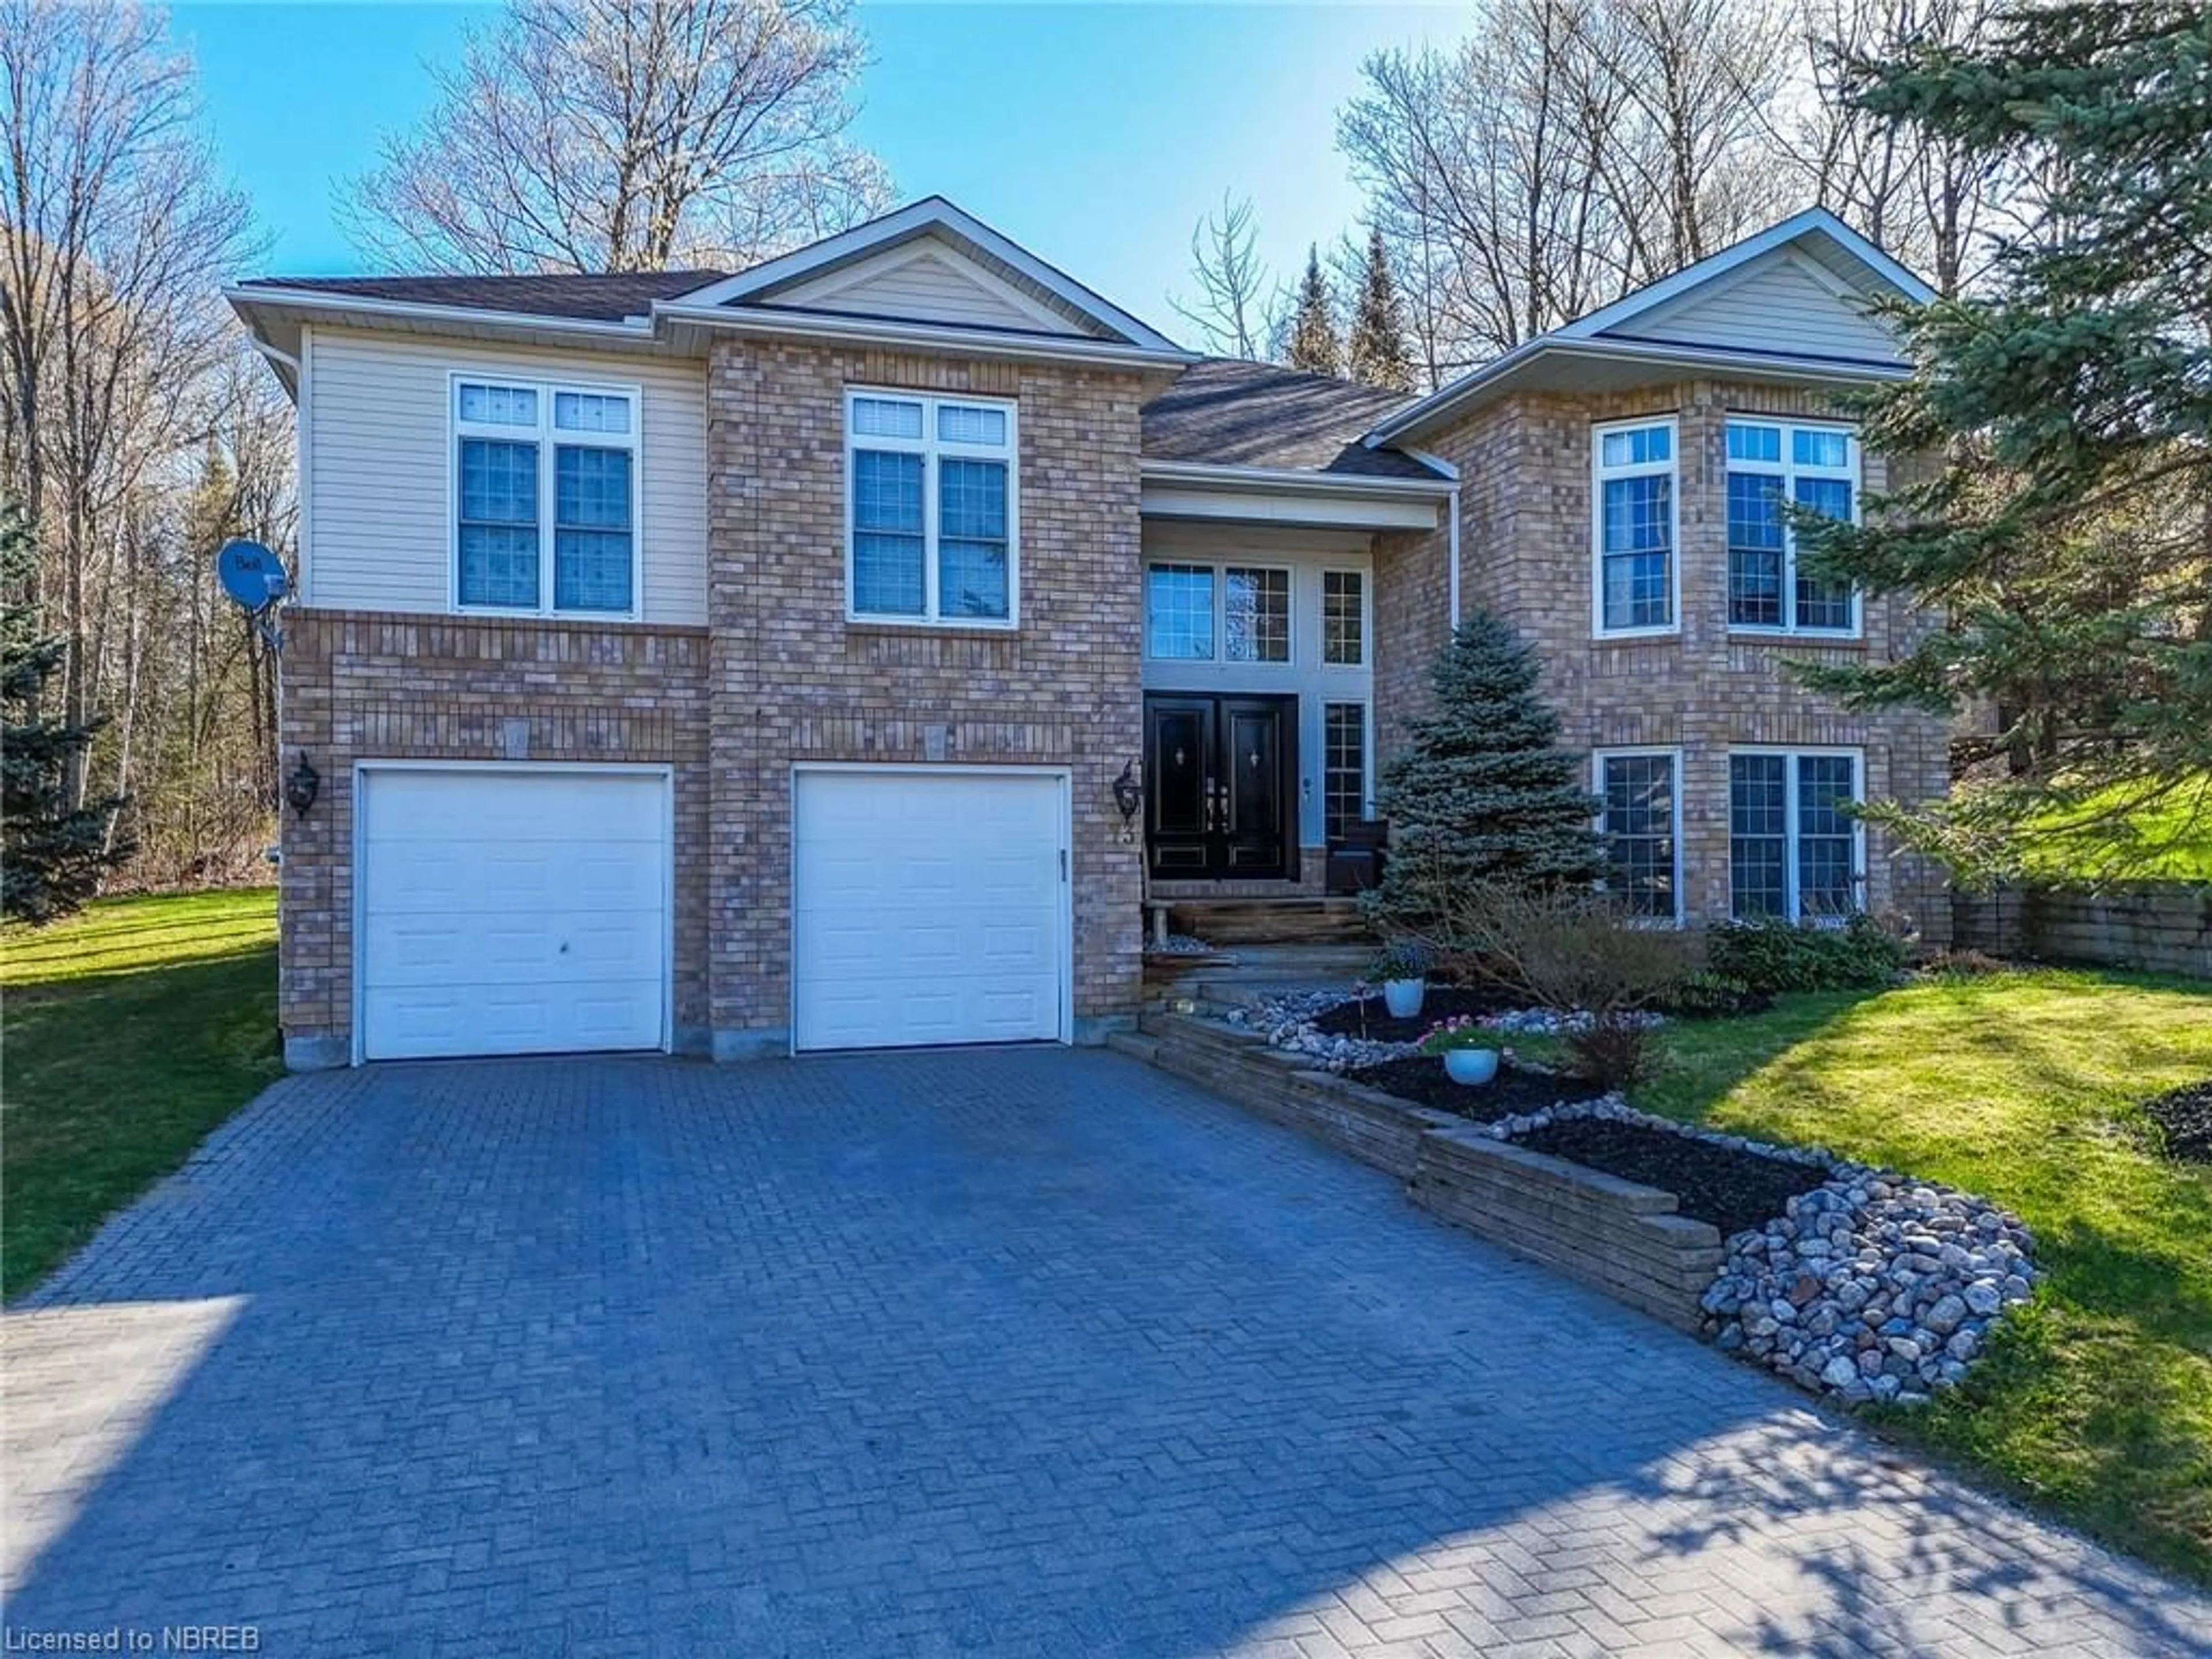 Home with brick exterior material for 73 Kenwood Hills Dr, North Bay Ontario P1C 1M3